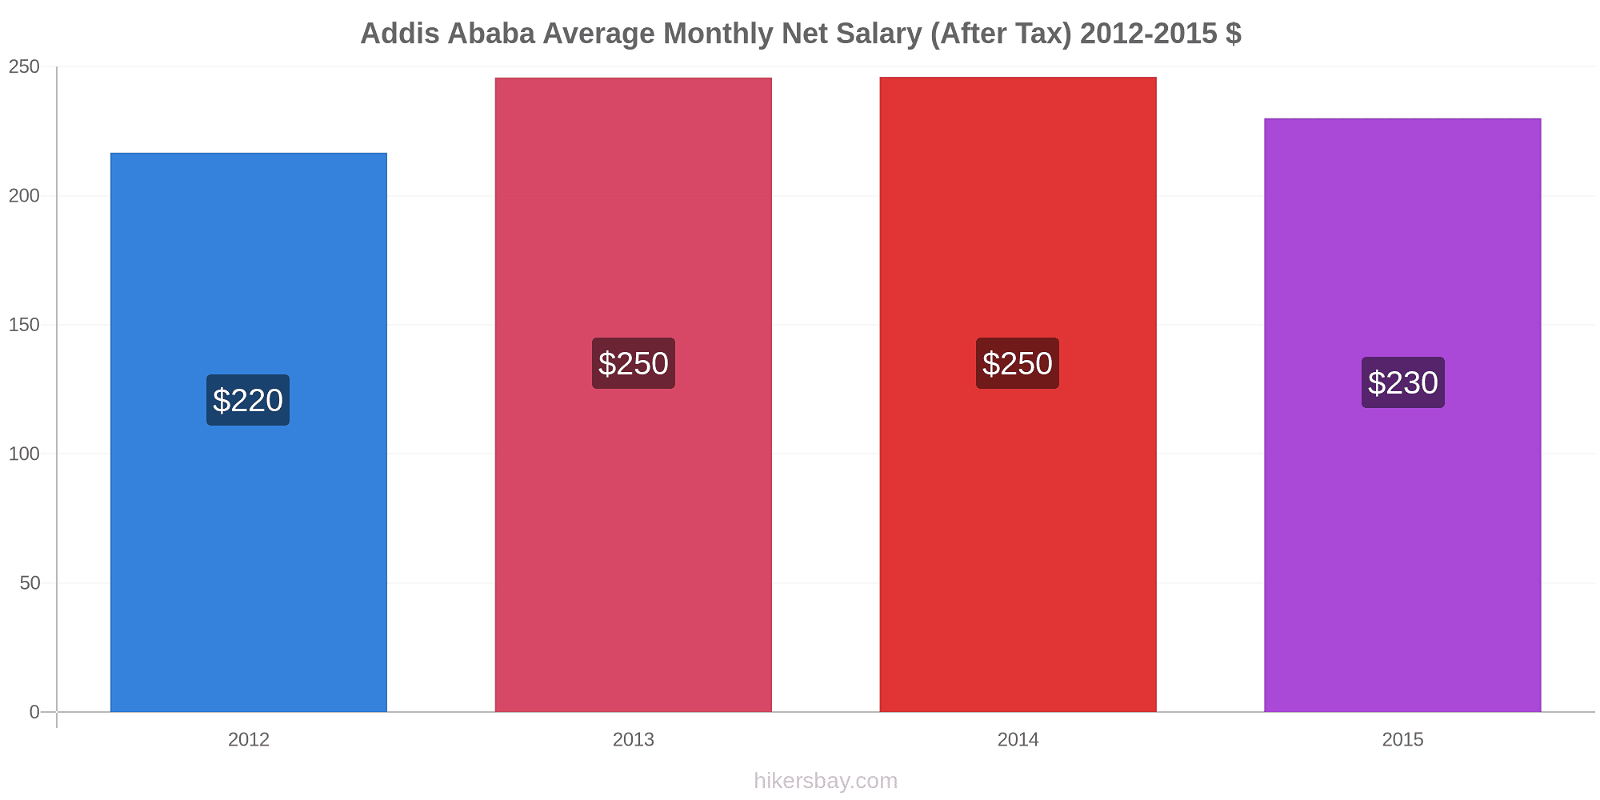 Addis Ababa price changes Average Monthly Net Salary (After Tax) hikersbay.com